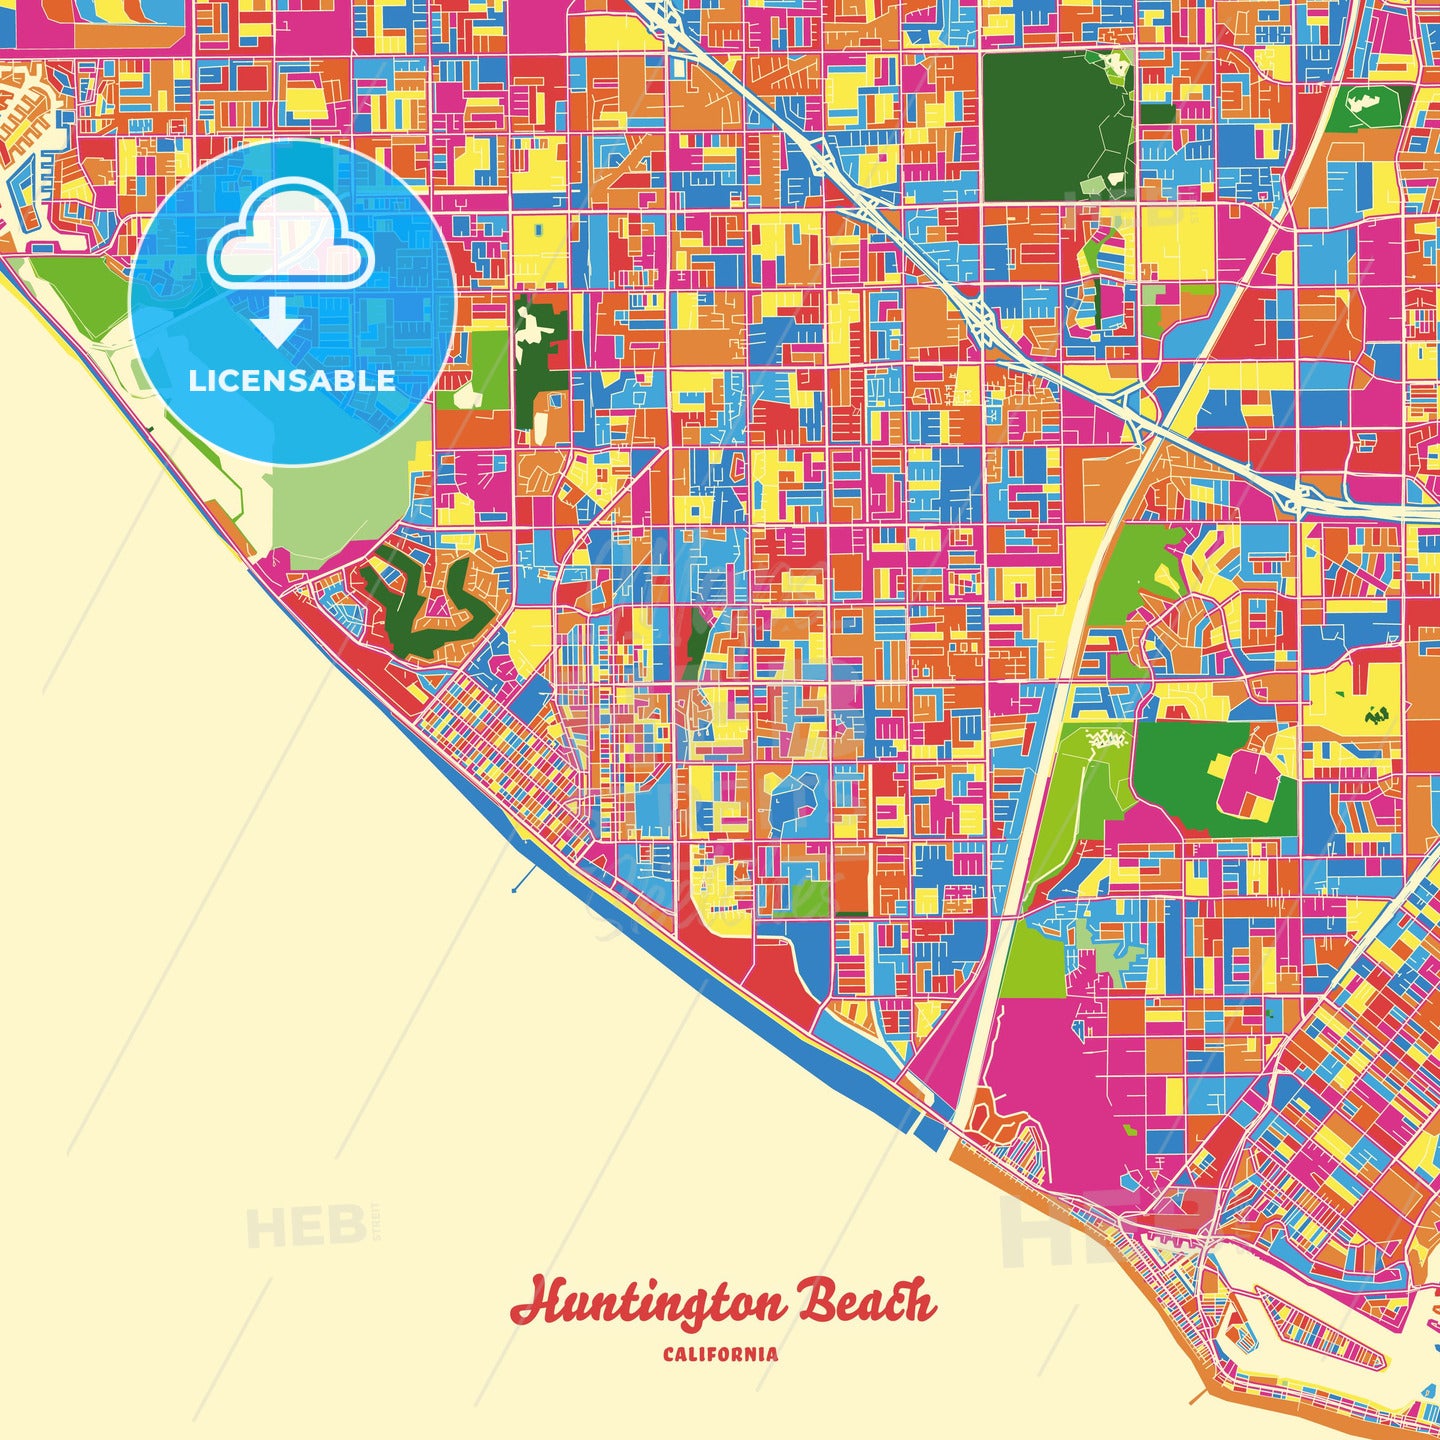 Huntington Beach, United States Crazy Colorful Street Map Poster Template - HEBSTREITS Sketches